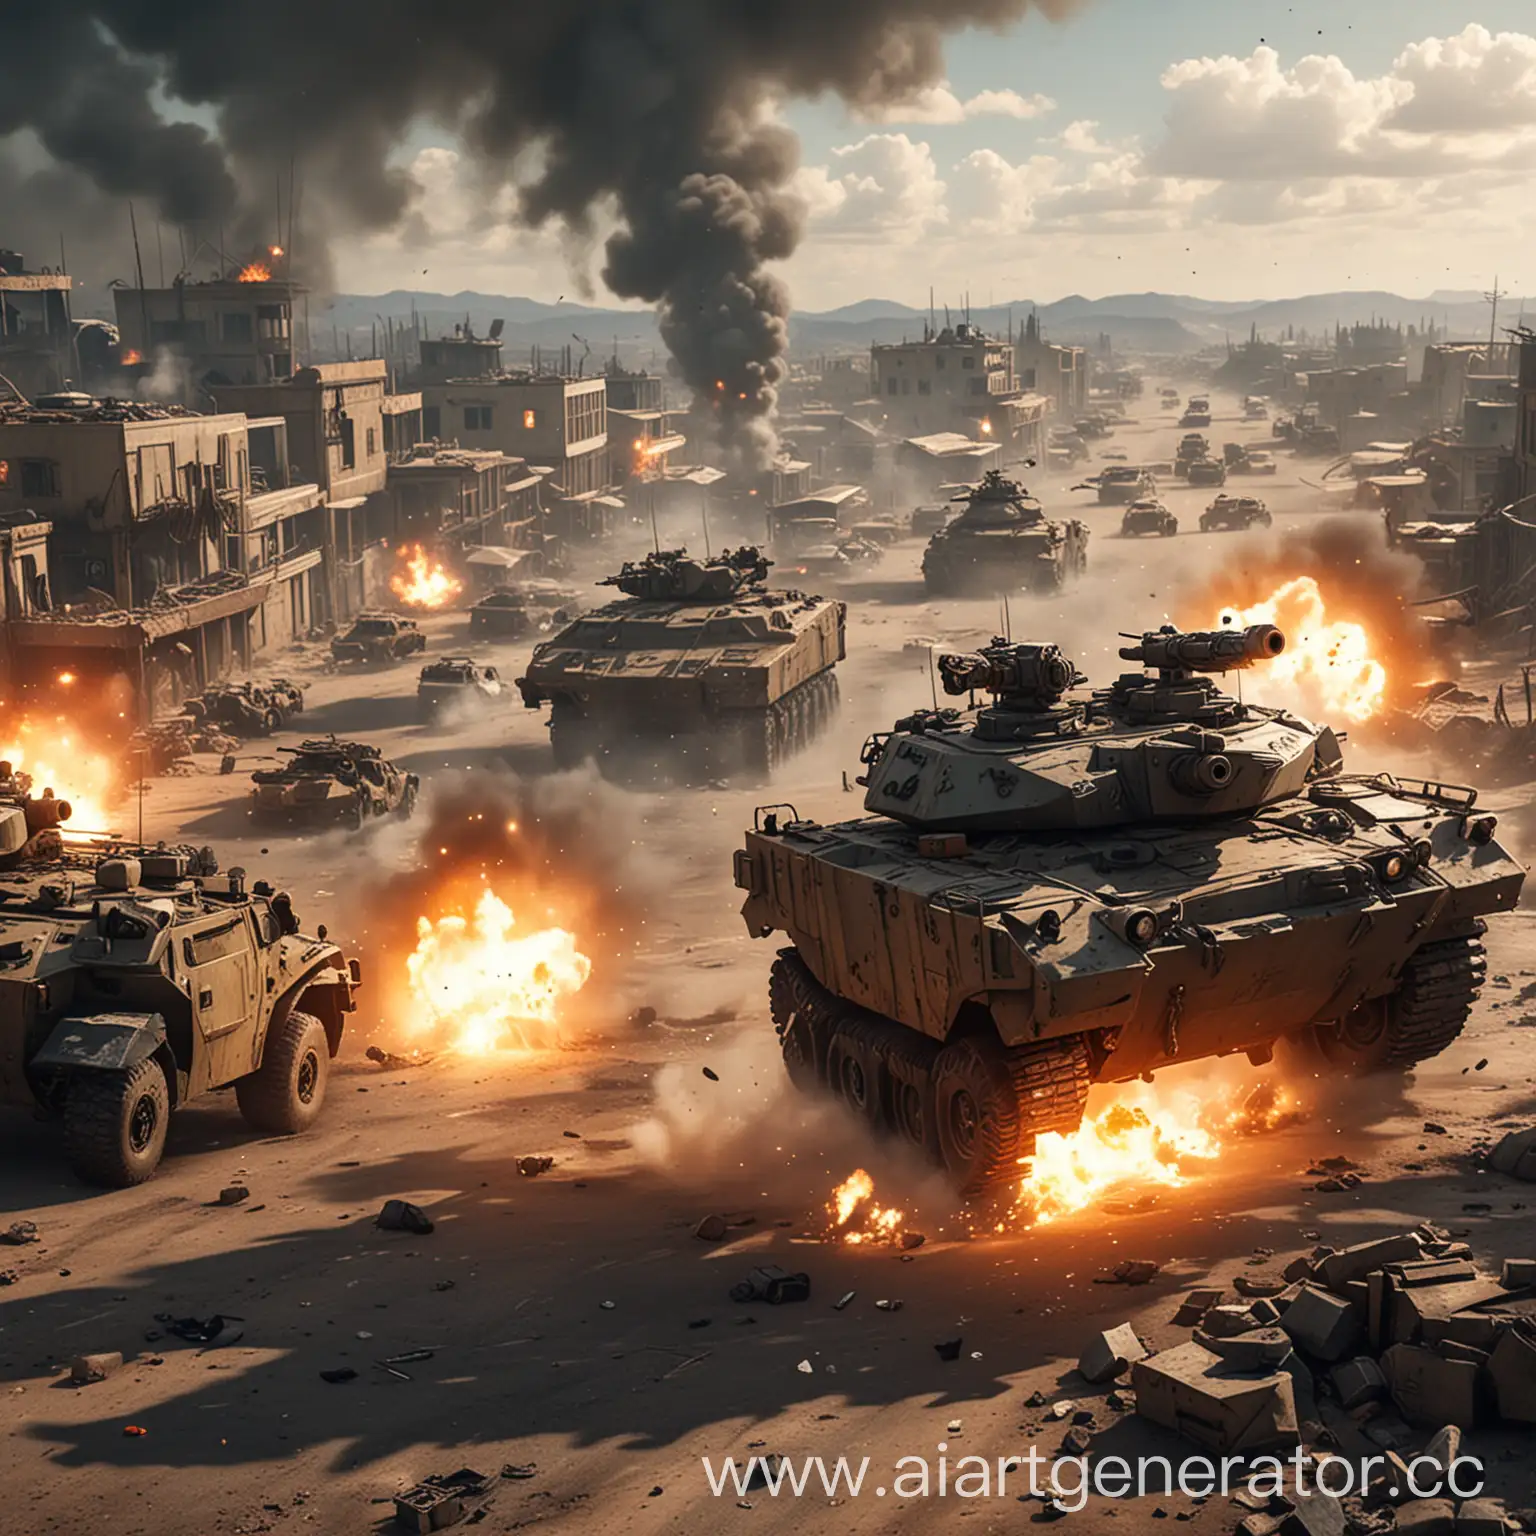 Chaos-of-Explosions-War-of-Armored-Vehicles-in-a-PostApocalyptic-Shootout